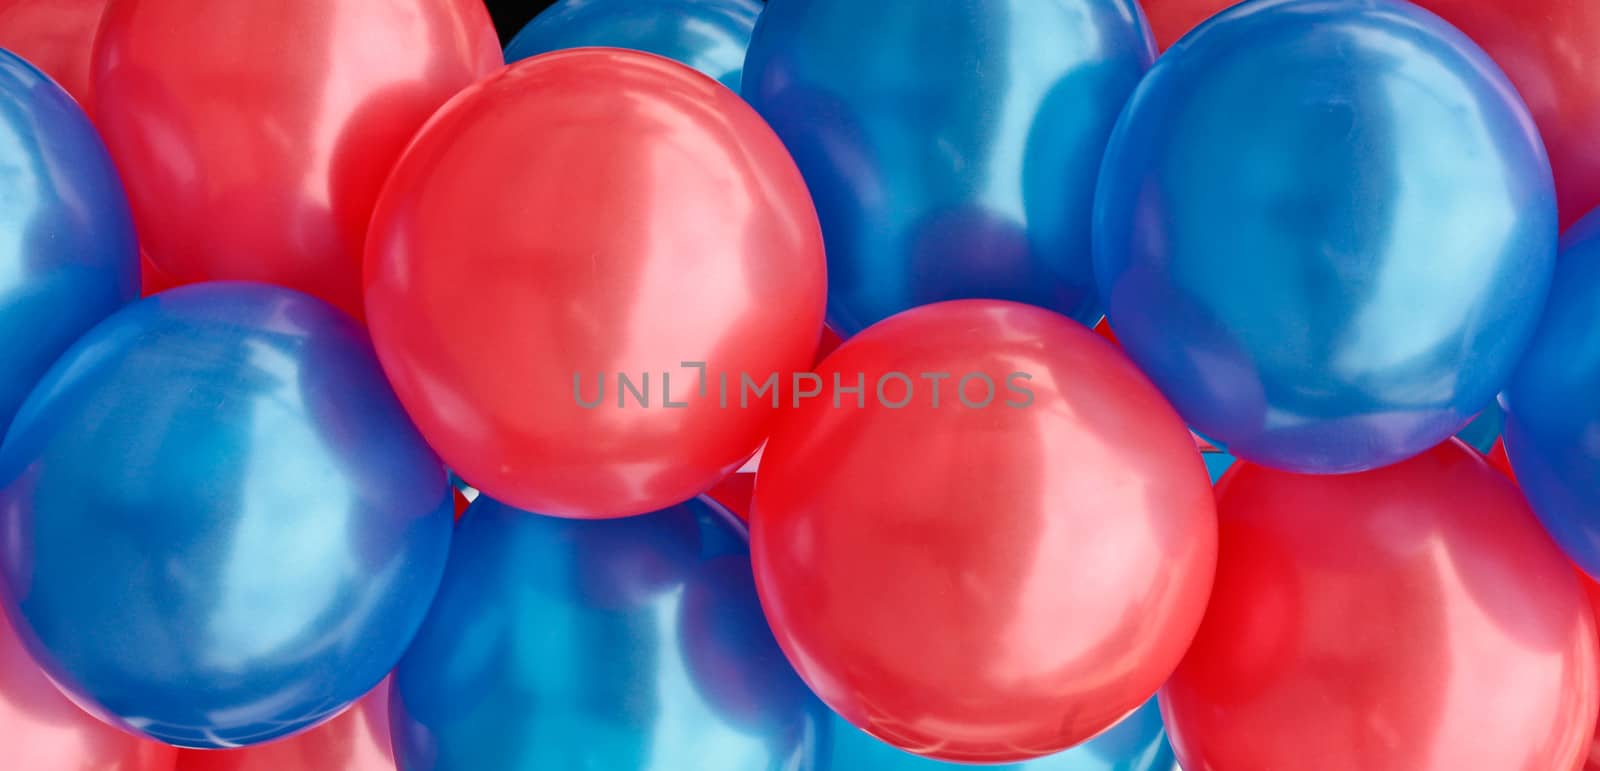 Red and blue balloons as a background image